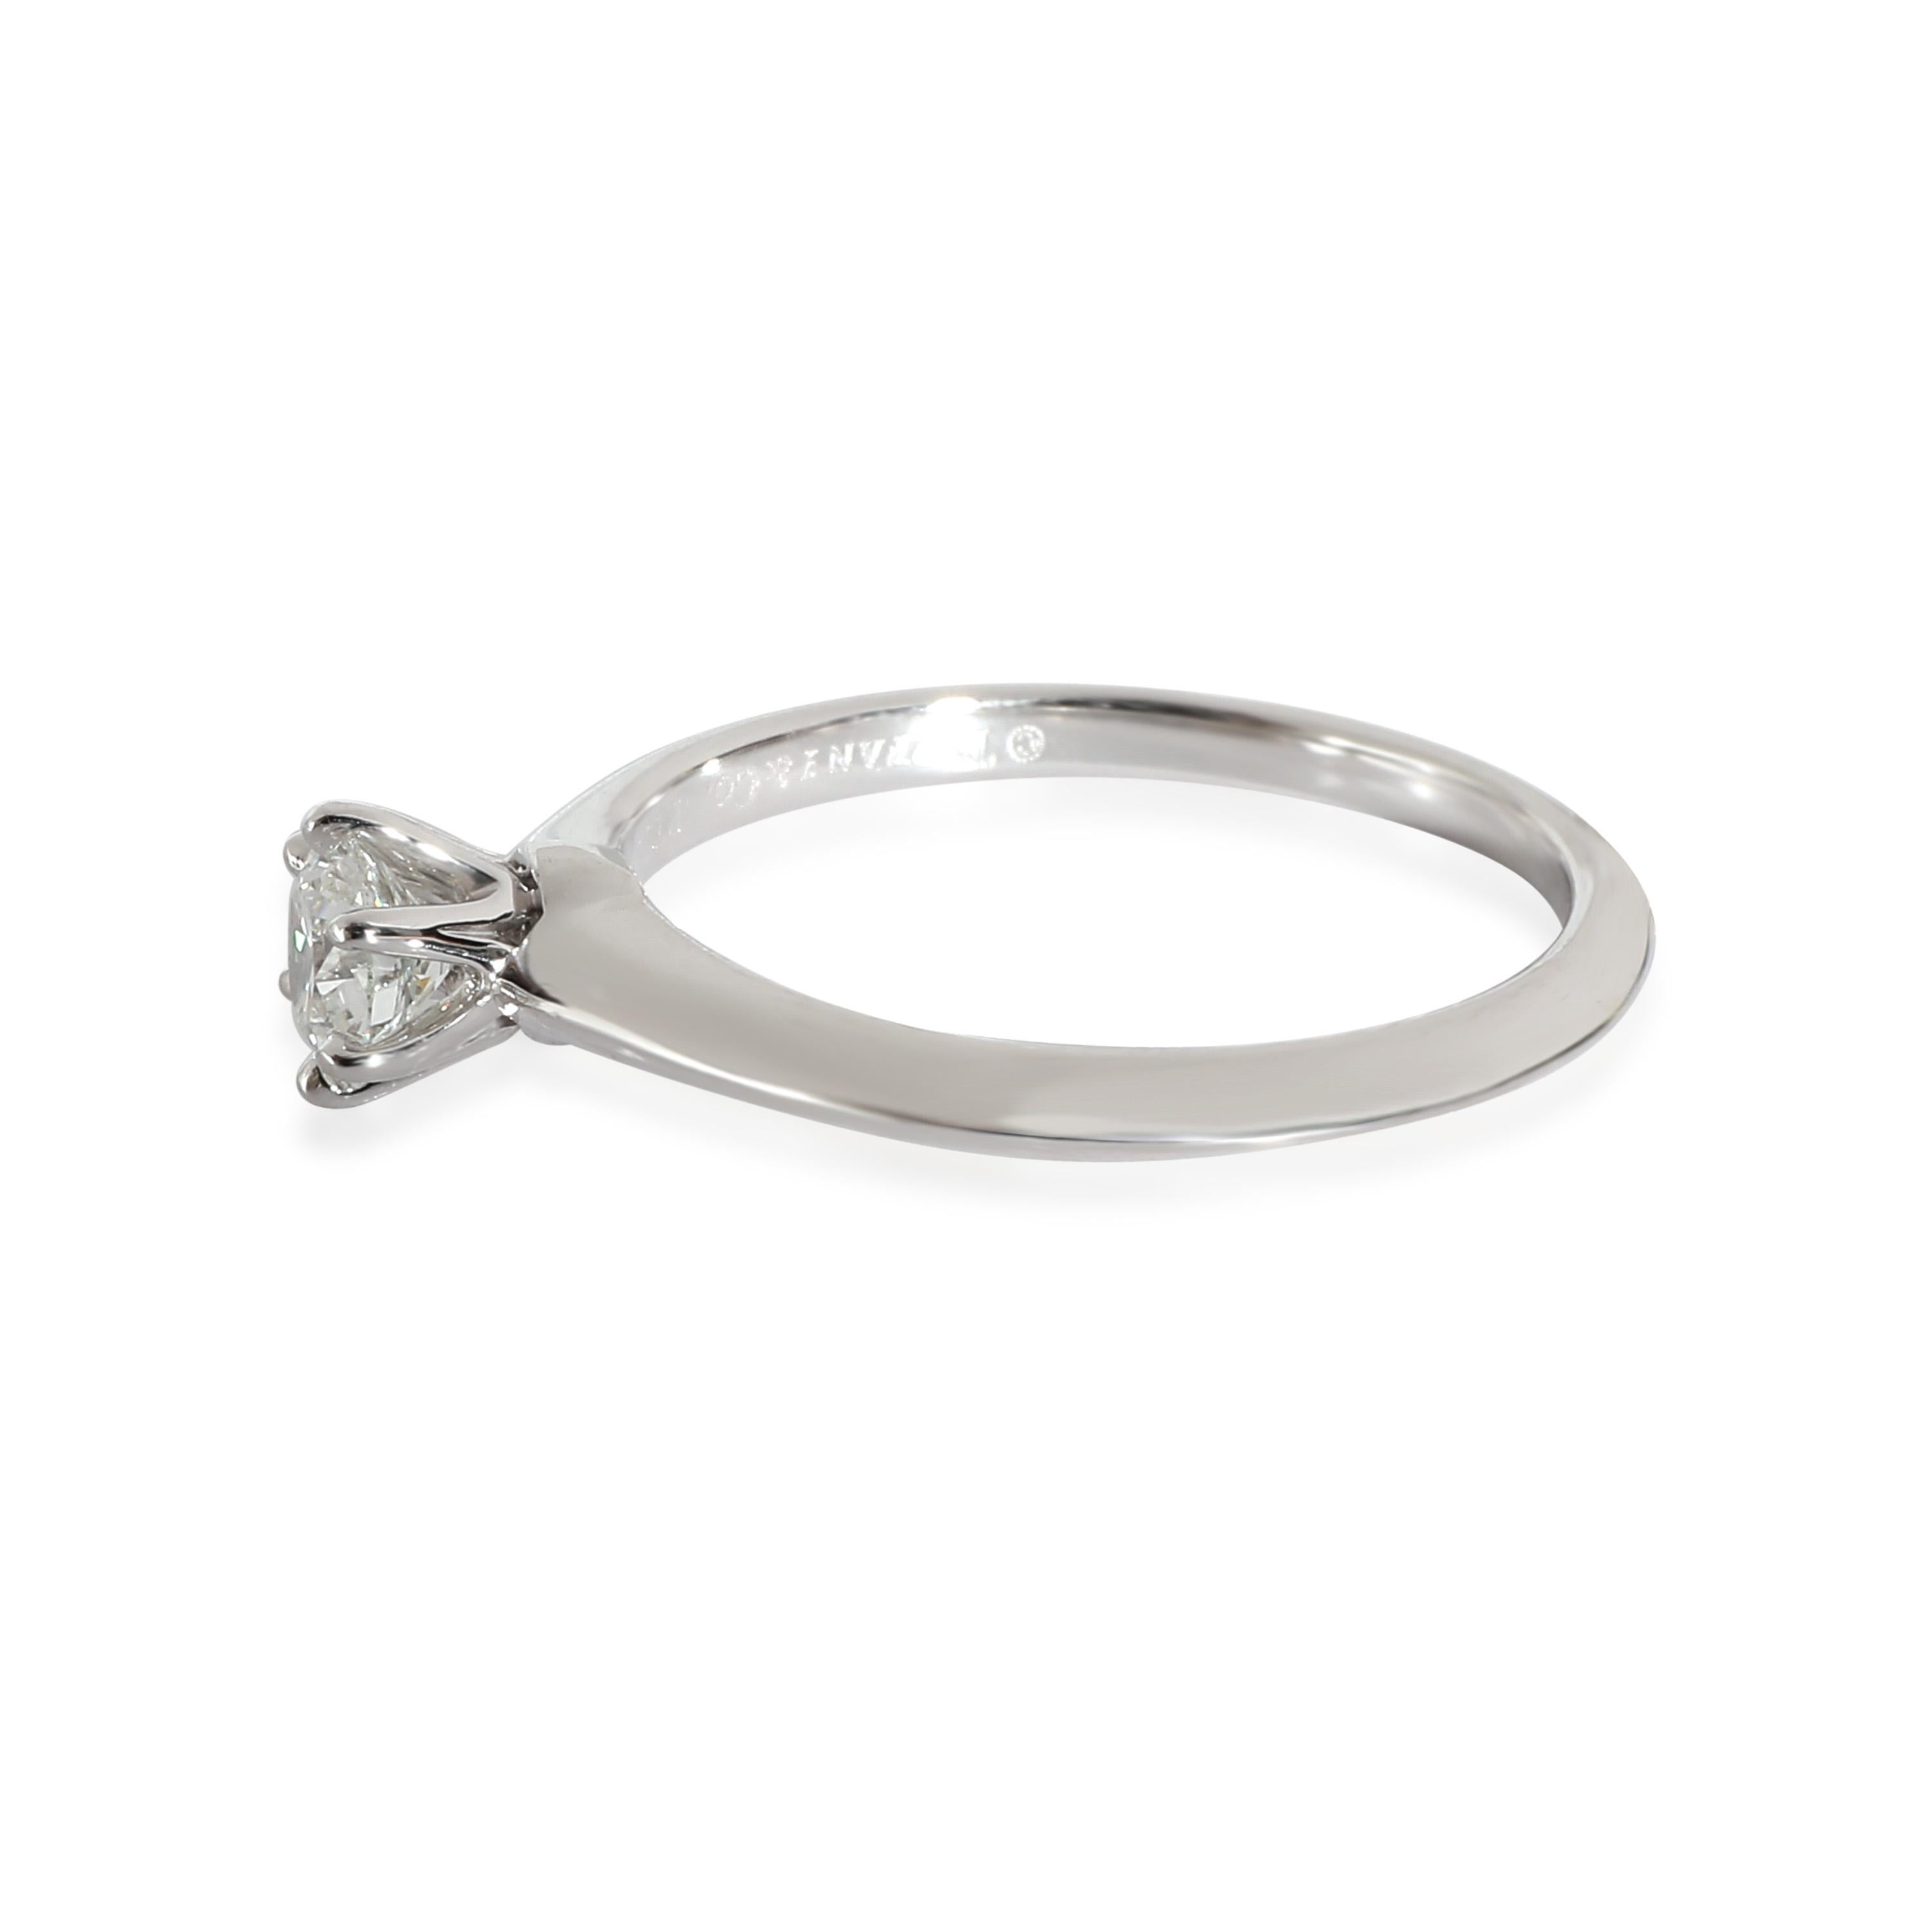 
Tiffany & Co. Diamond Engagement Ring in Platinum G VS1 0.34 CTW

PRIMARY DETAILS
SKU: 125957
Listing Title: Tiffany & Co. Diamond Engagement Ring in Platinum G VS1 0.34 CTW
Condition Description: Retails for 3410 USD. In excellent condition and